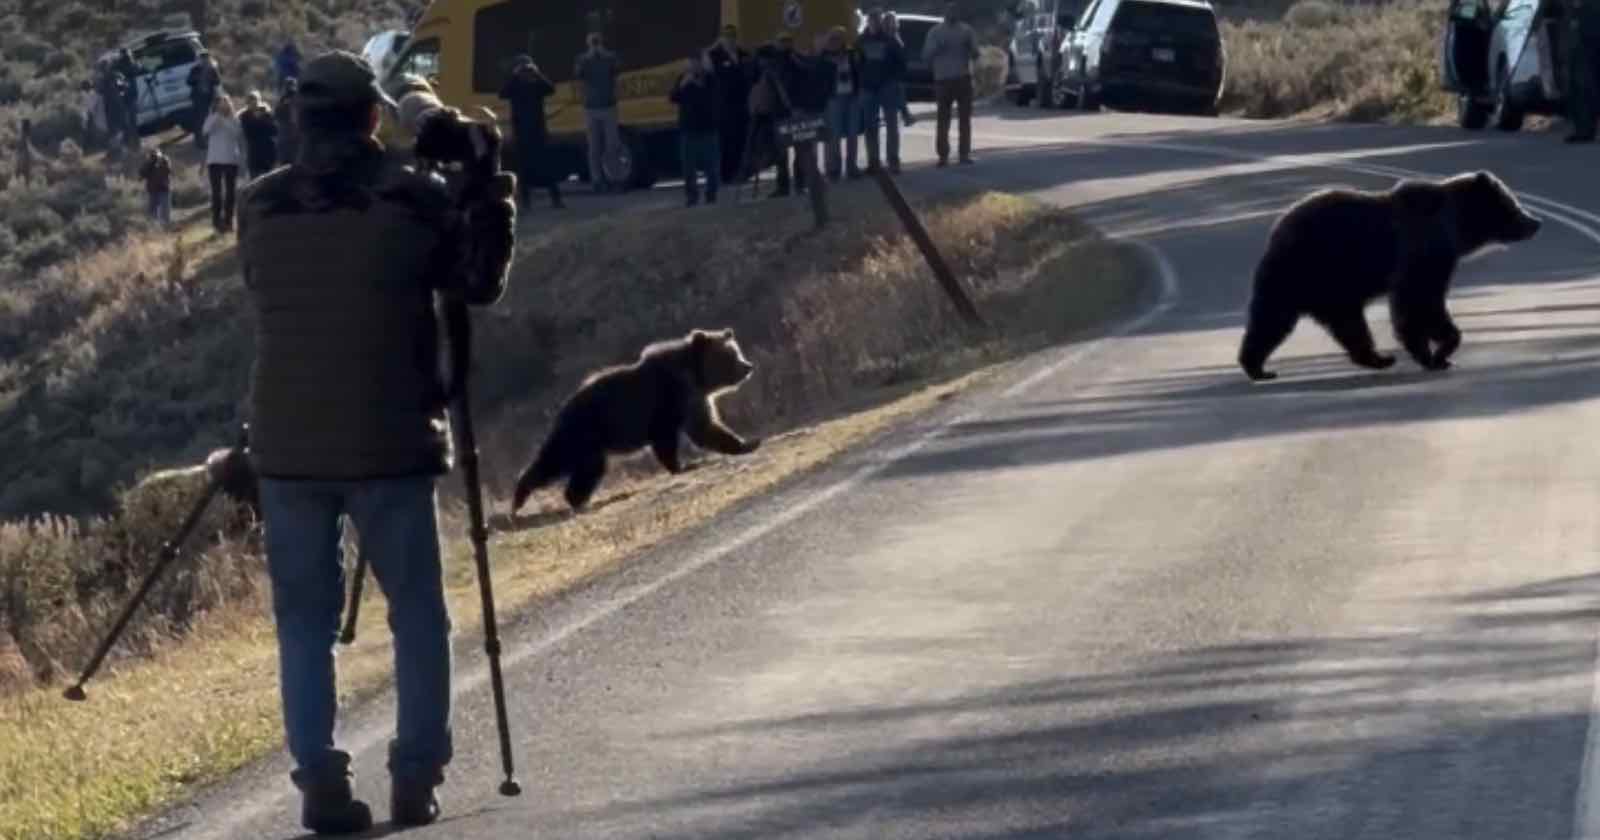  yellowstone park guide films photographer who refused leave 